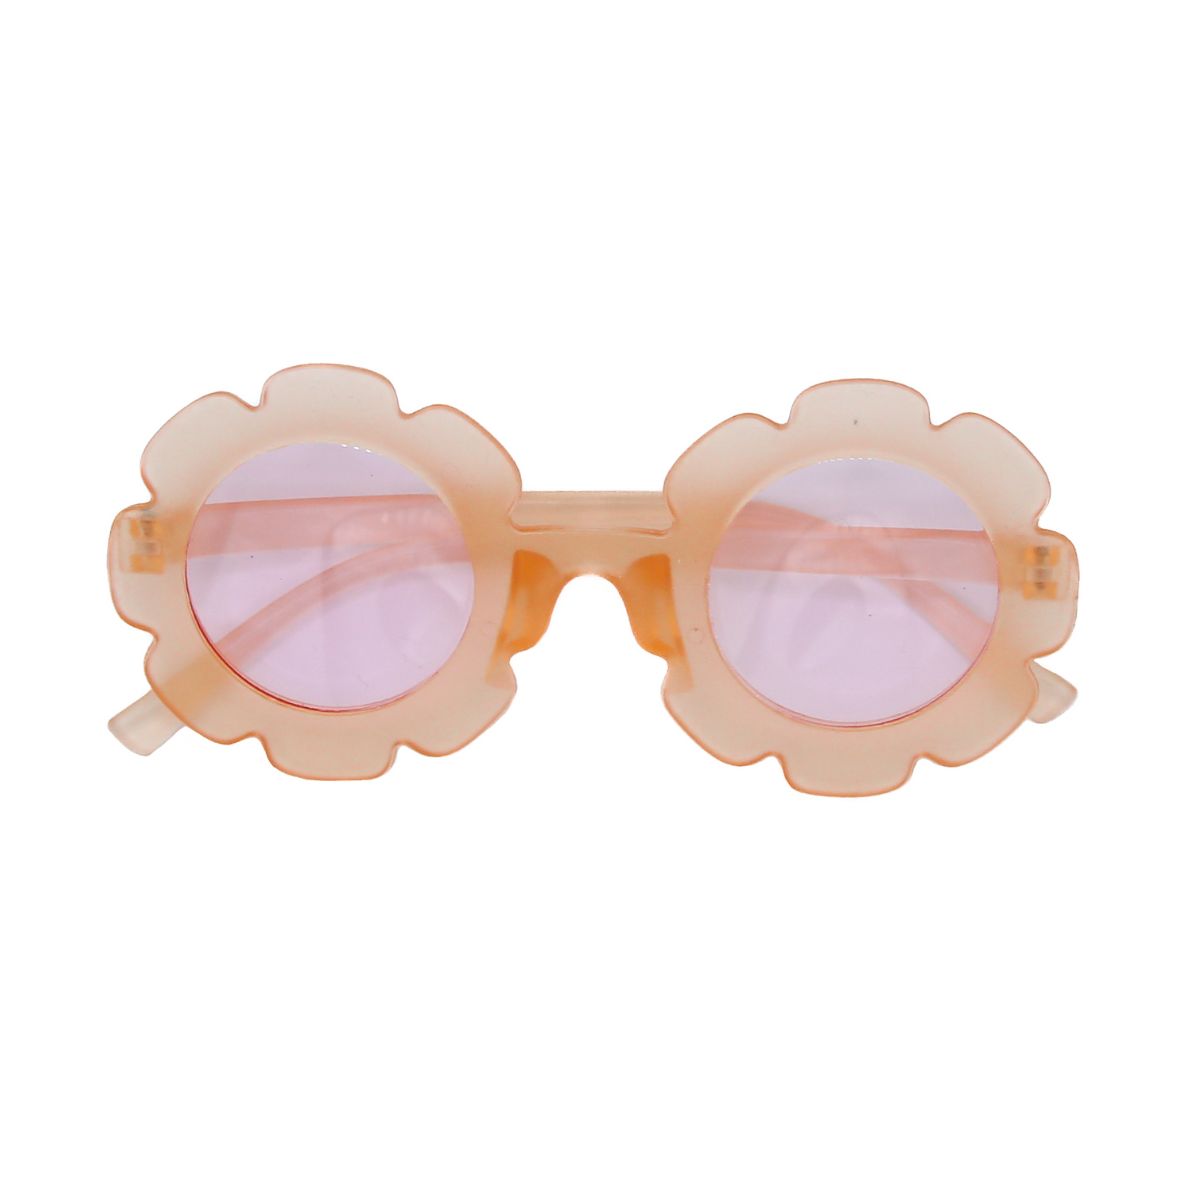 The Baby Cubby Kids' Flower Sunglasses - Clear Coral wit Pink Lenses